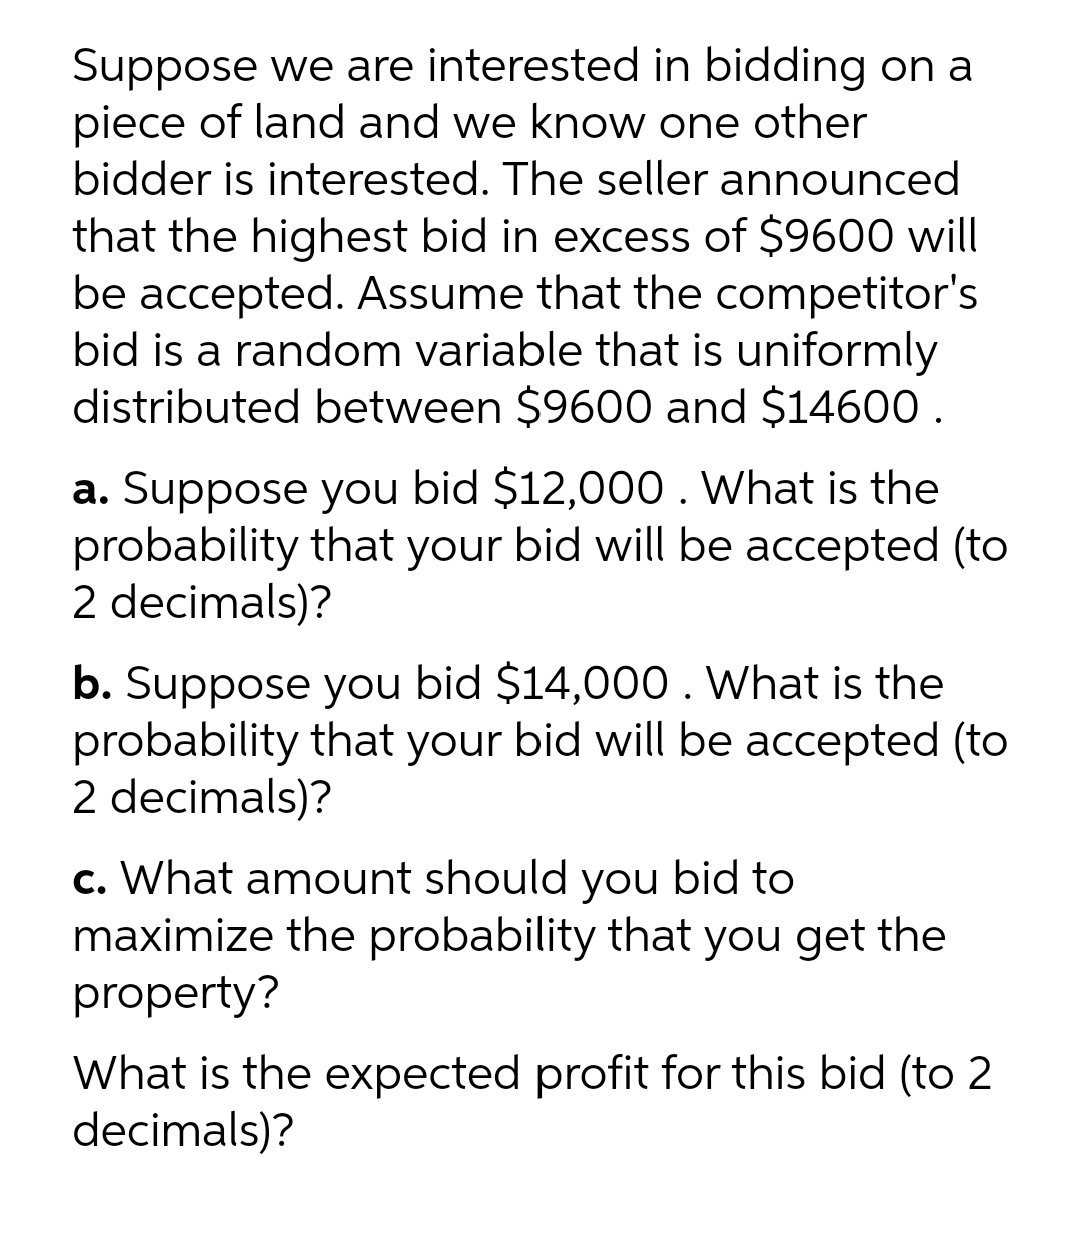 Suppose we are interested in bidding on a
piece of land and we know one other
bidder is interested. The seller announced
that the highest bid in excess of $9600 will
be accepted. Assume that the competitor's
bid is a random variable that is uniformly
distributed between $9600 and $14600 .
a. Suppose you bid $12,000. What is the
probability that your bid will be accepted (to
2 decimals)?
b. Suppose you bid $14,000. What is the
probability that your bid will be accepted (to
2 decimals)?
c. What amount should you bid to
maximize the probability that you get the
property?
What is the expected profit for this bid (to 2
decimals)?
